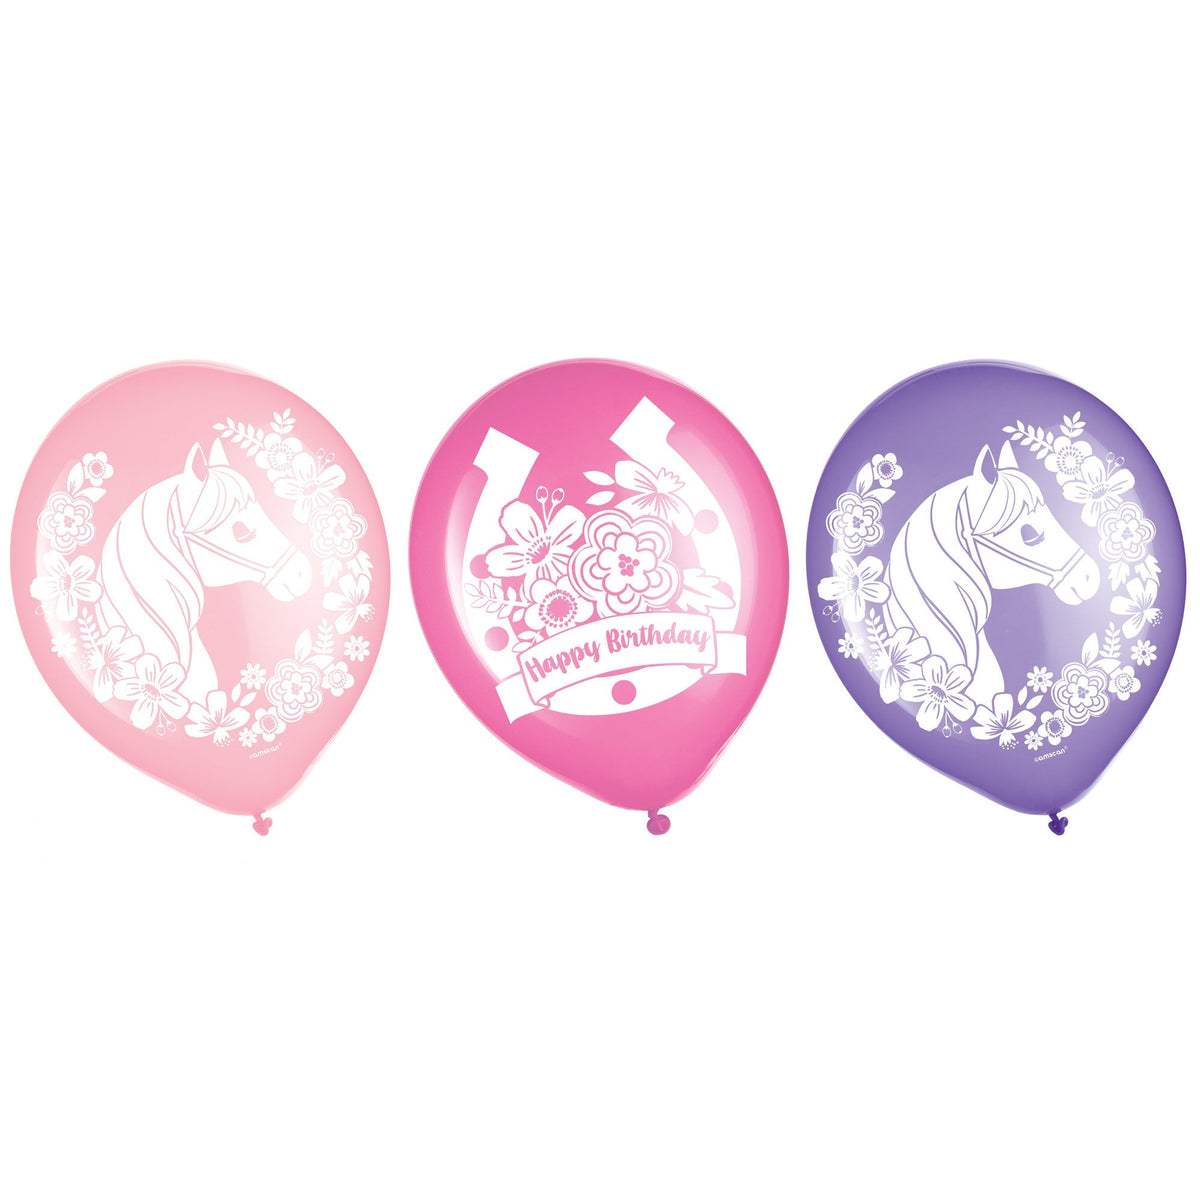 AMSCAN CA Kids Birthday Saddle Up Printed Latex Balloons, Pink and Purple, 12 Inches, 6 Count 192937106631